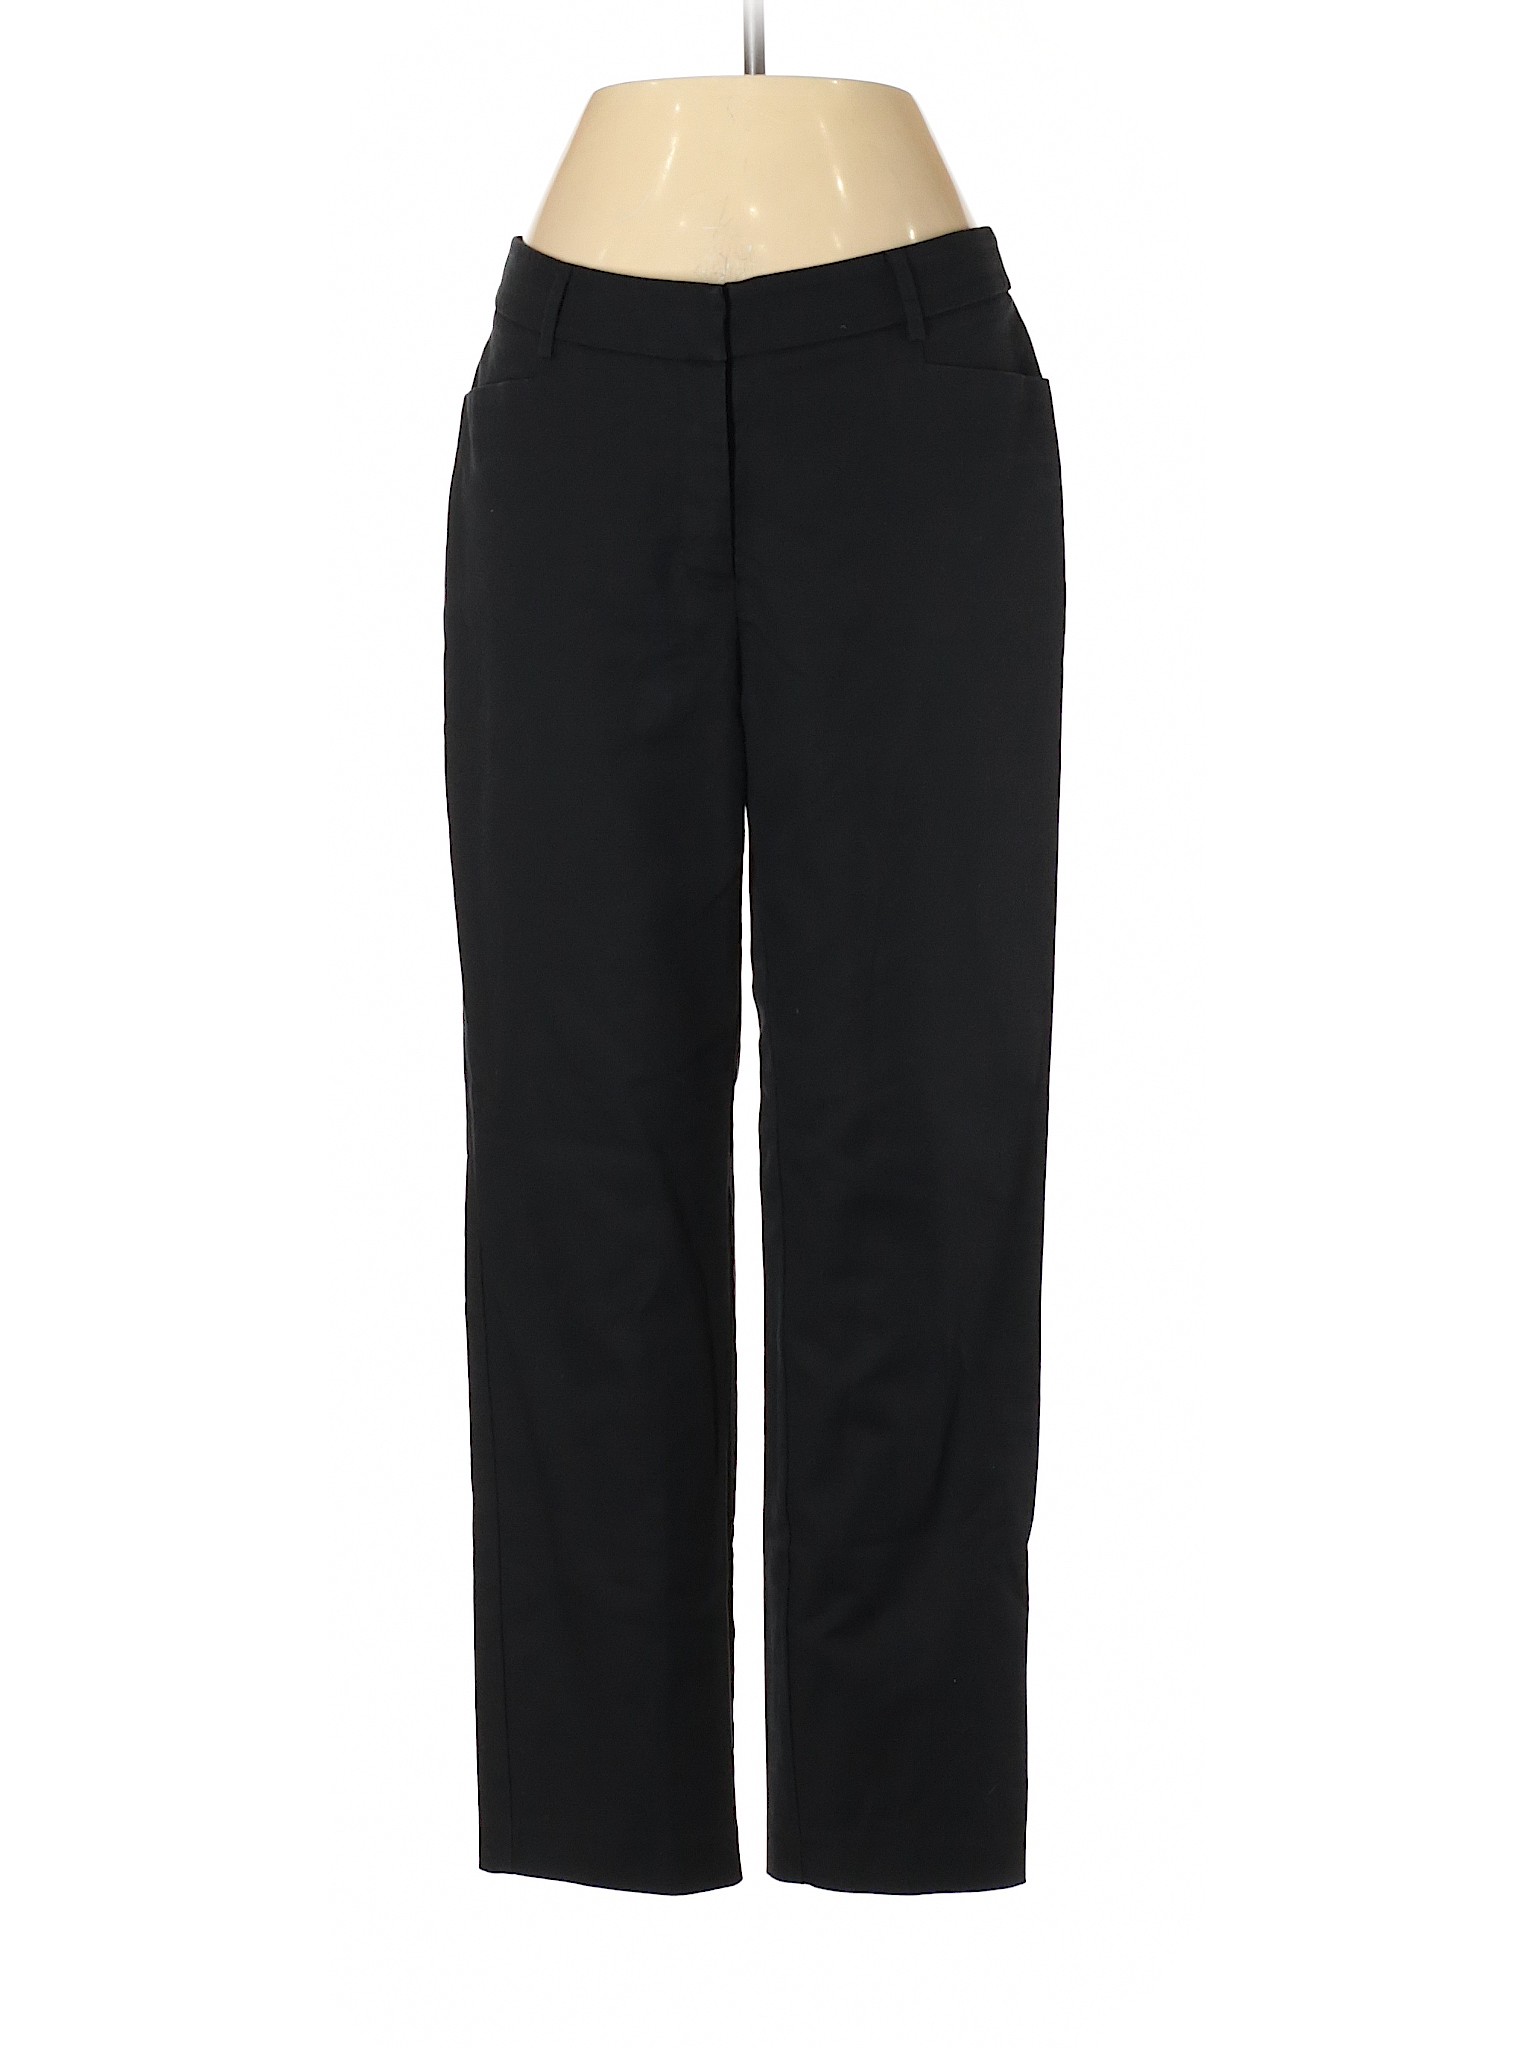 212 Collection Women Black Casual Pants 4 | eBay